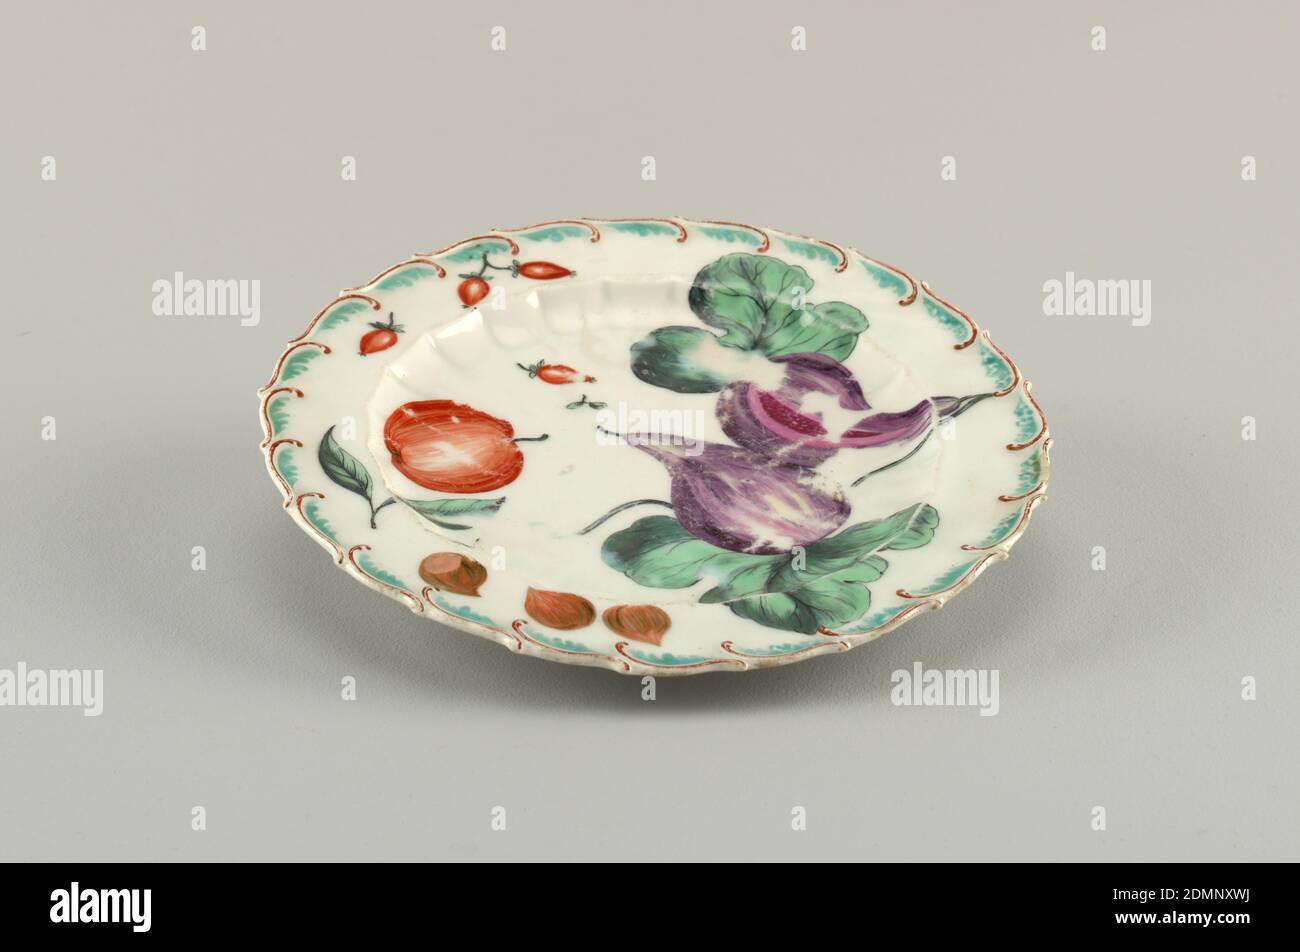 Fruit Plate, Chelsea Porcelain Manufactory, English, established ca. 1743/45, soft paste porcelain, vitreous enamel, Flat marly springing from scalloped inner rim. Raised, feathered edge, painted brown and green. In center, large and small cucumber and an apple. On marly, three rose hips, a purple long radish, currents and small red berries., England, 1753–1758, ceramics, Decorative Arts, plate, plate Stock Photo